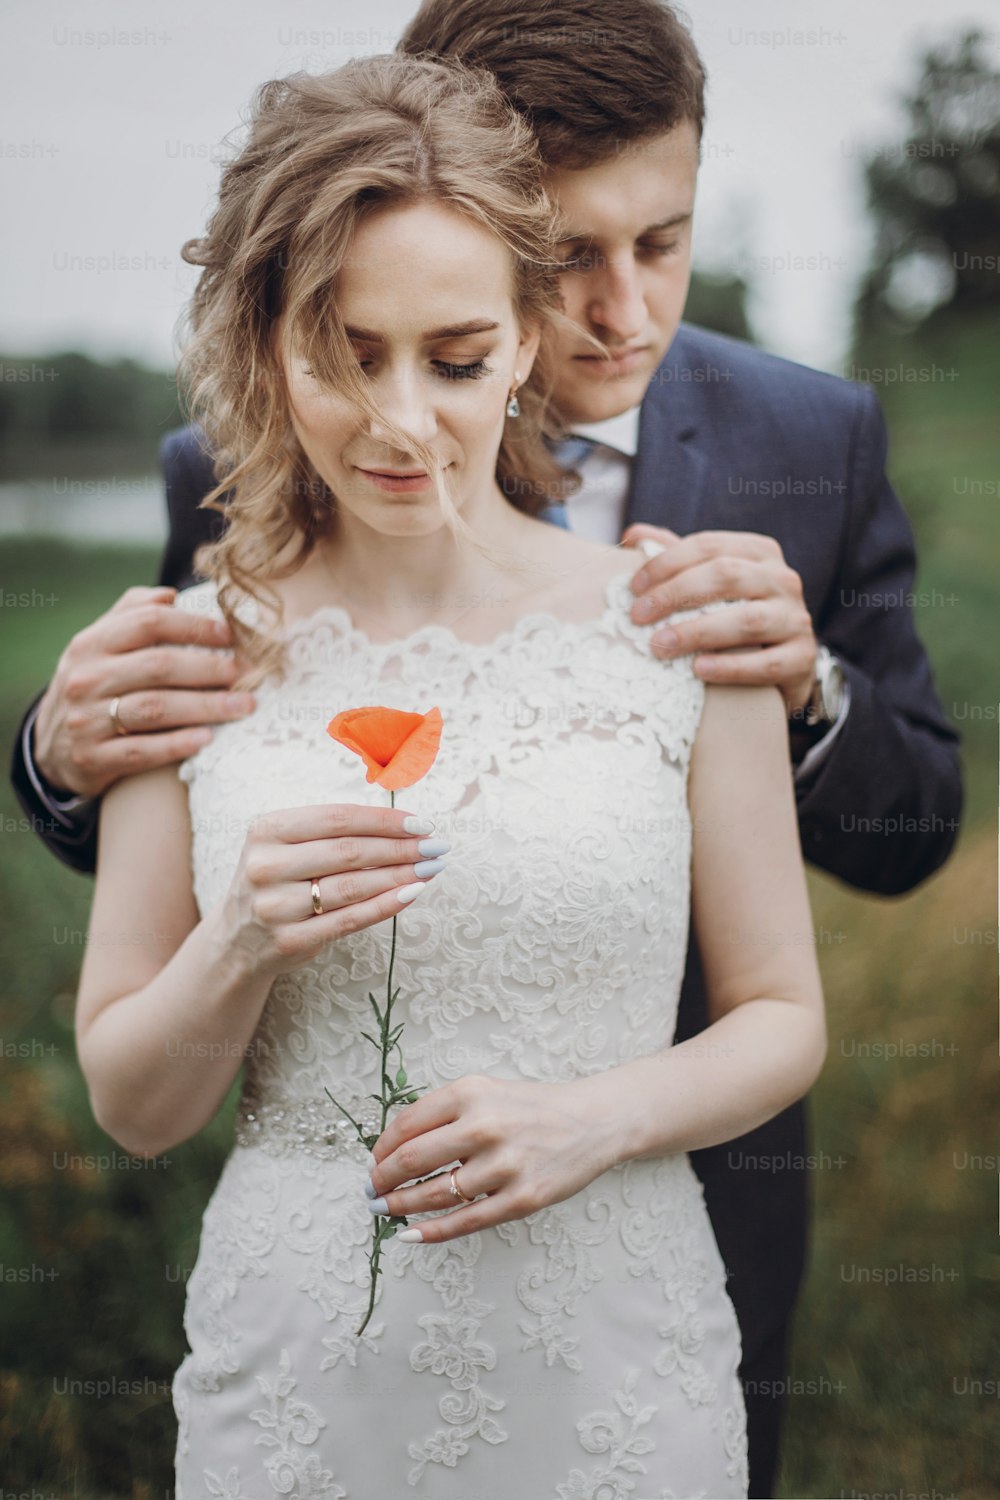 Gorgeous blonde bride in elegant lace wedding dress holding a flower while being hugged from behind by handsome groom, newlywed couple portrait